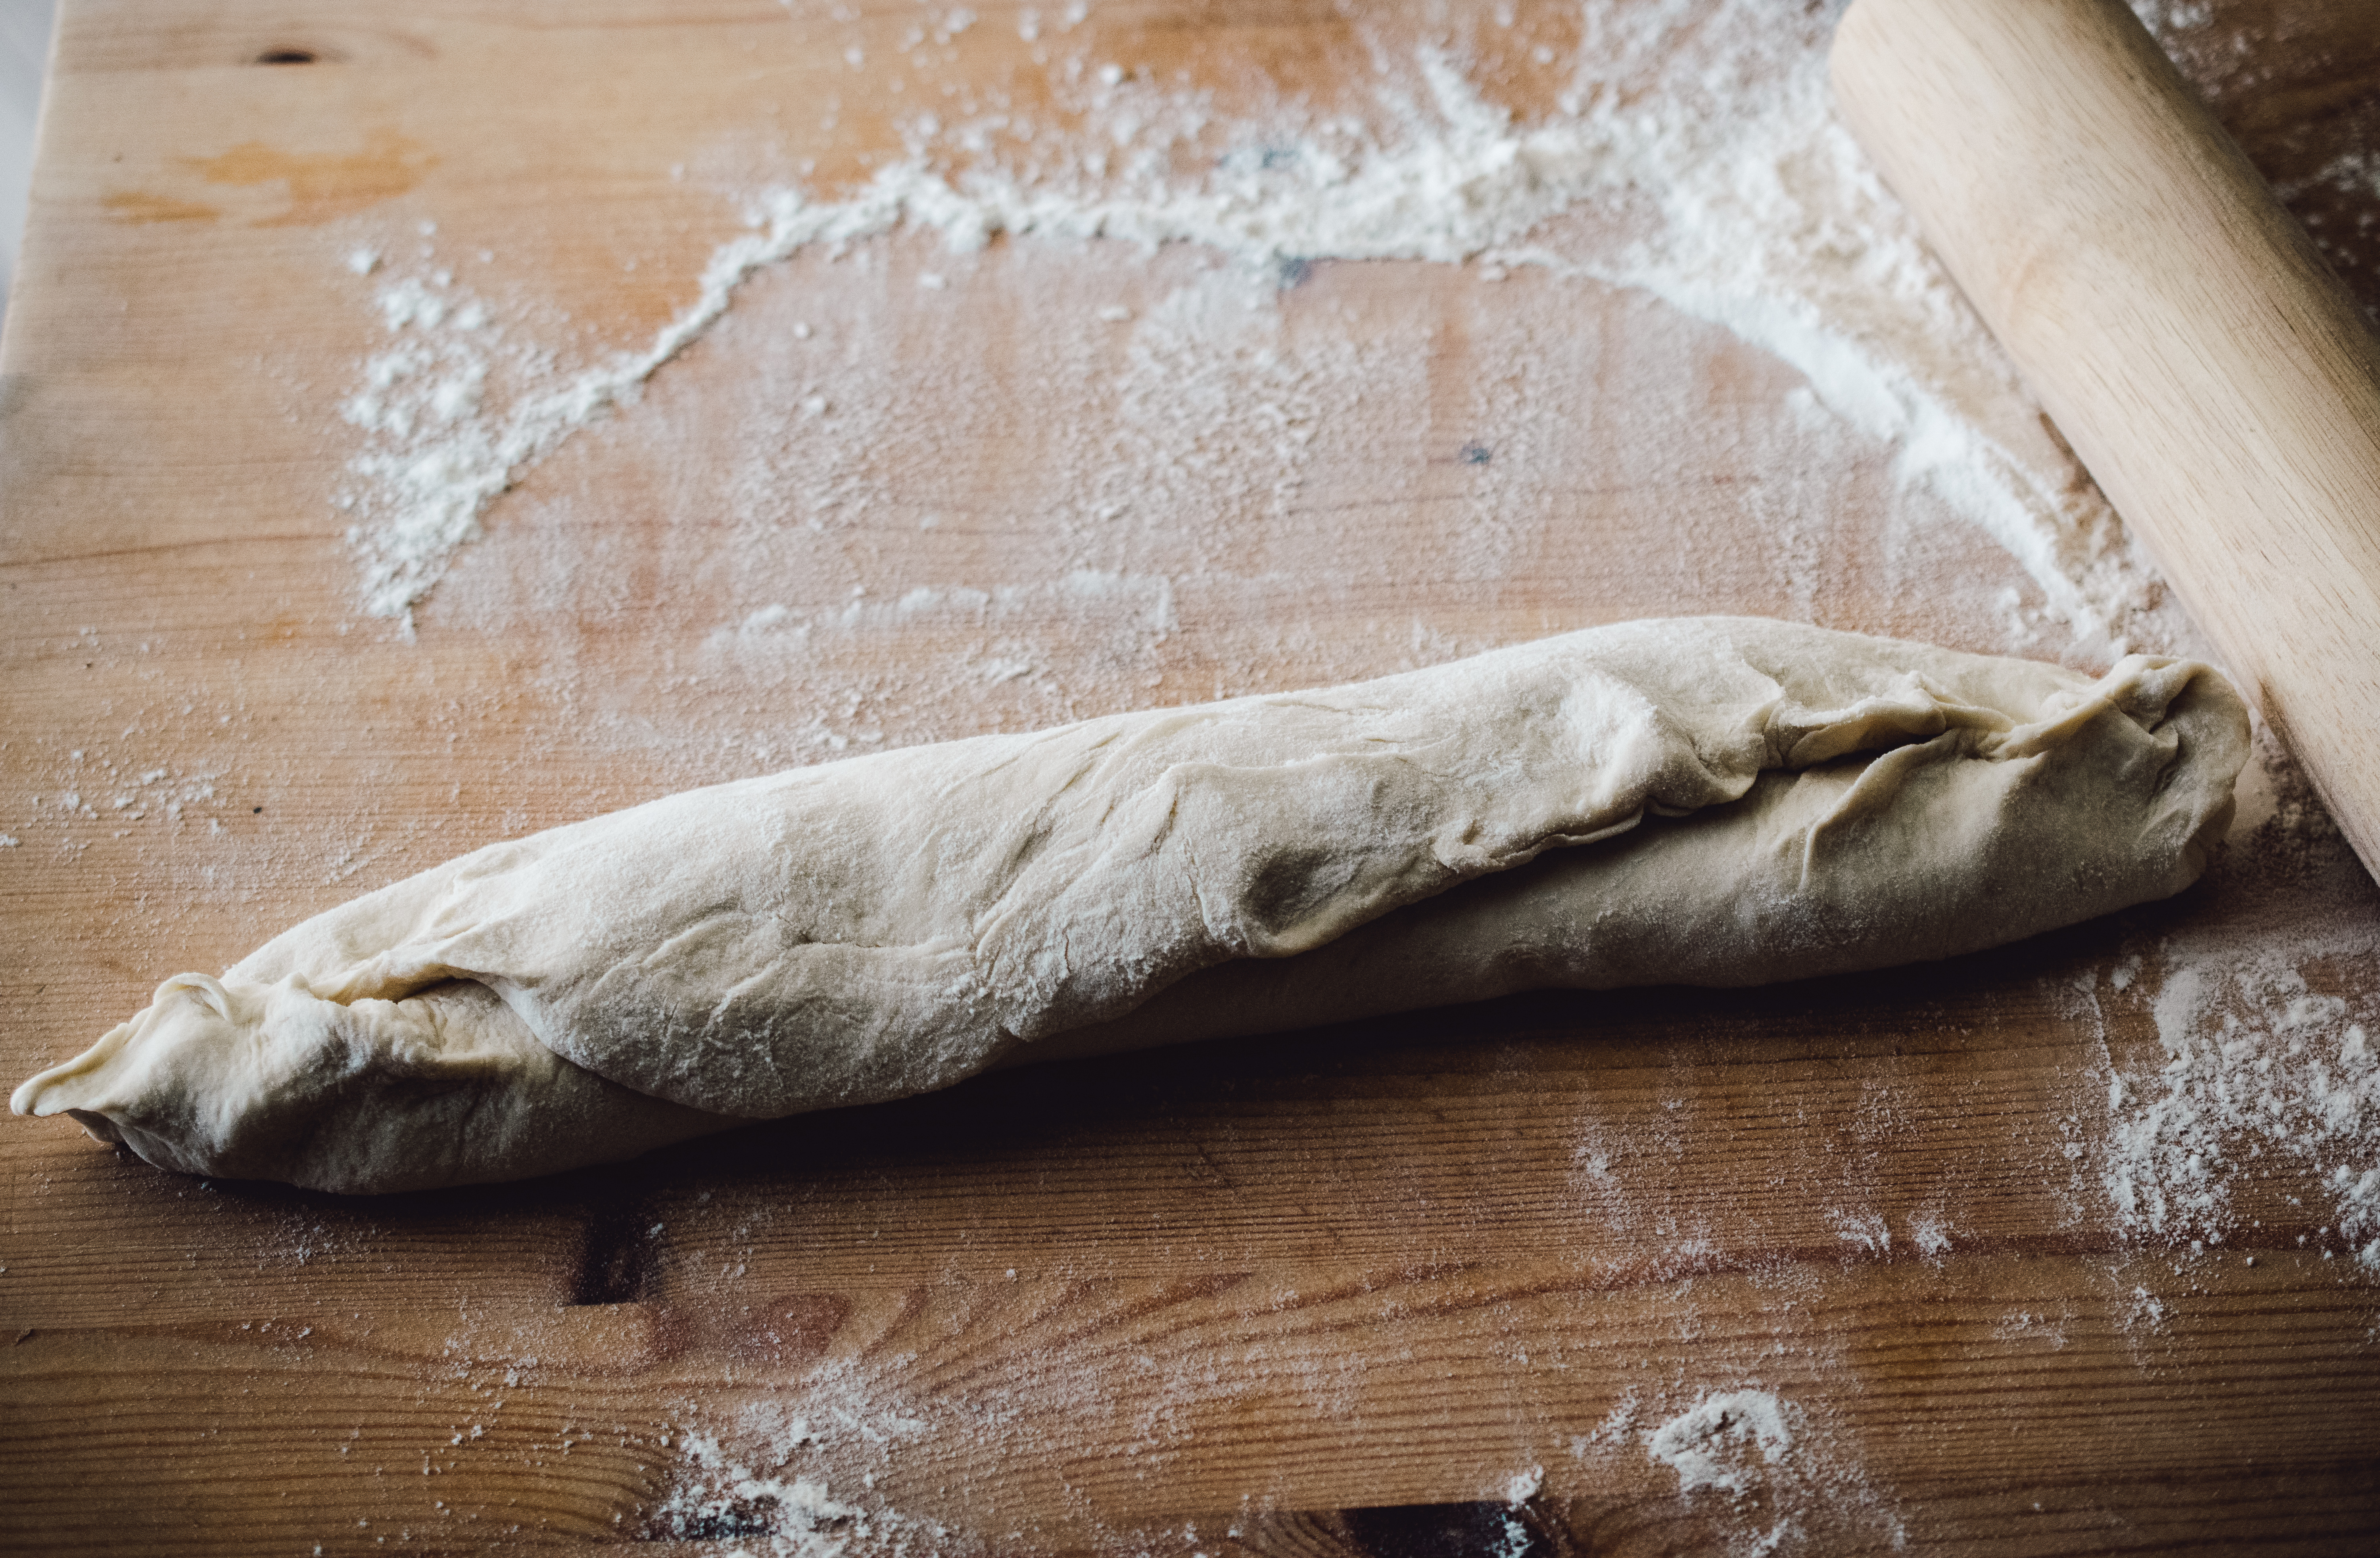 Raw, white bread dough, rolled into the classic French loaf shape, laying on a floured cutting board